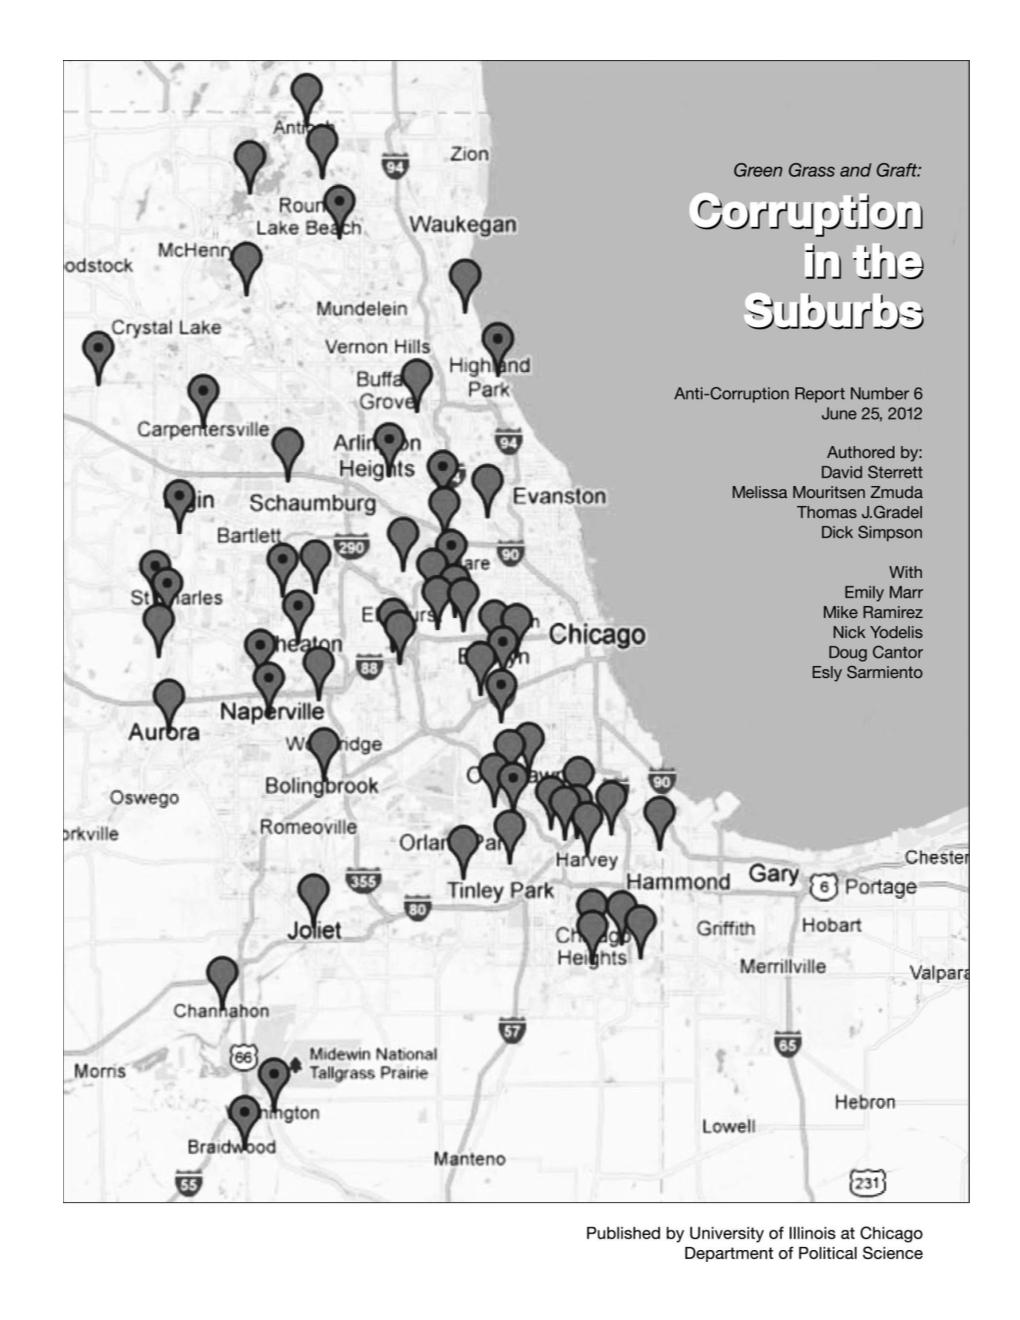 Suburban Corruption Takes Different Forms Ranging from Officials Hiring Family Members to Police Chiefs Protecting Criminals